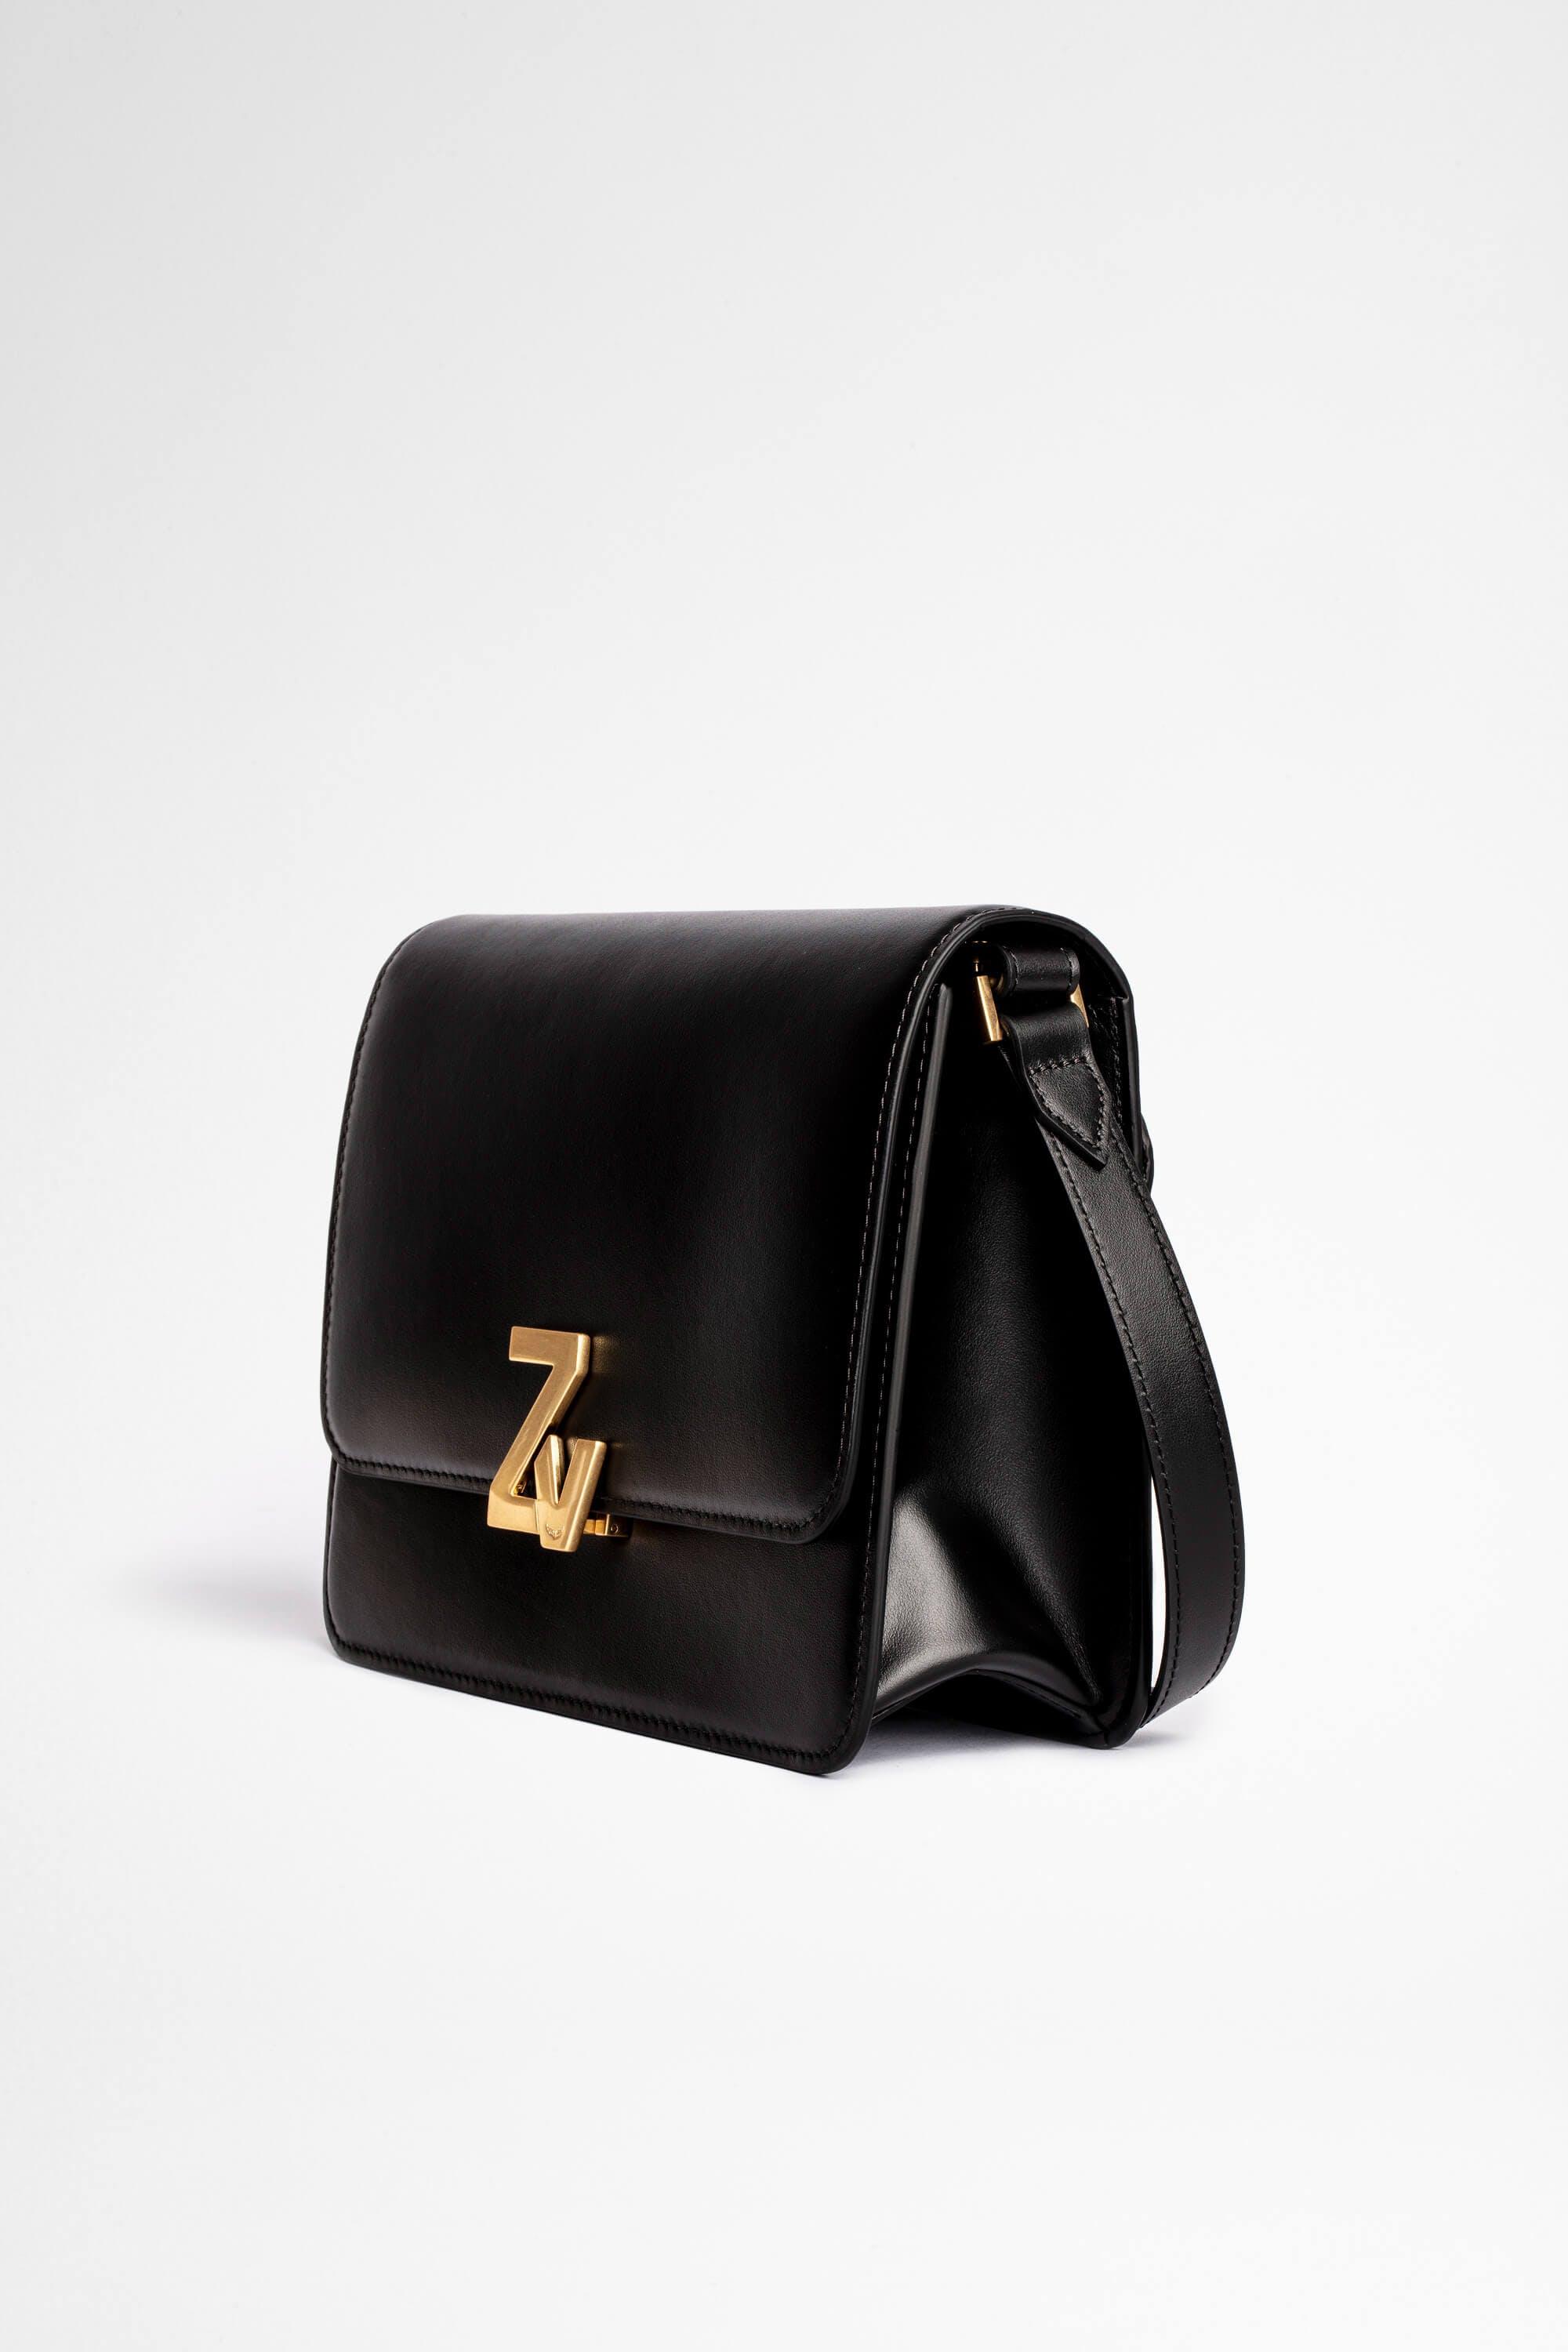 Zadig & Voltaire Leather Zv Initiale Le City Bag in Black - Lyst